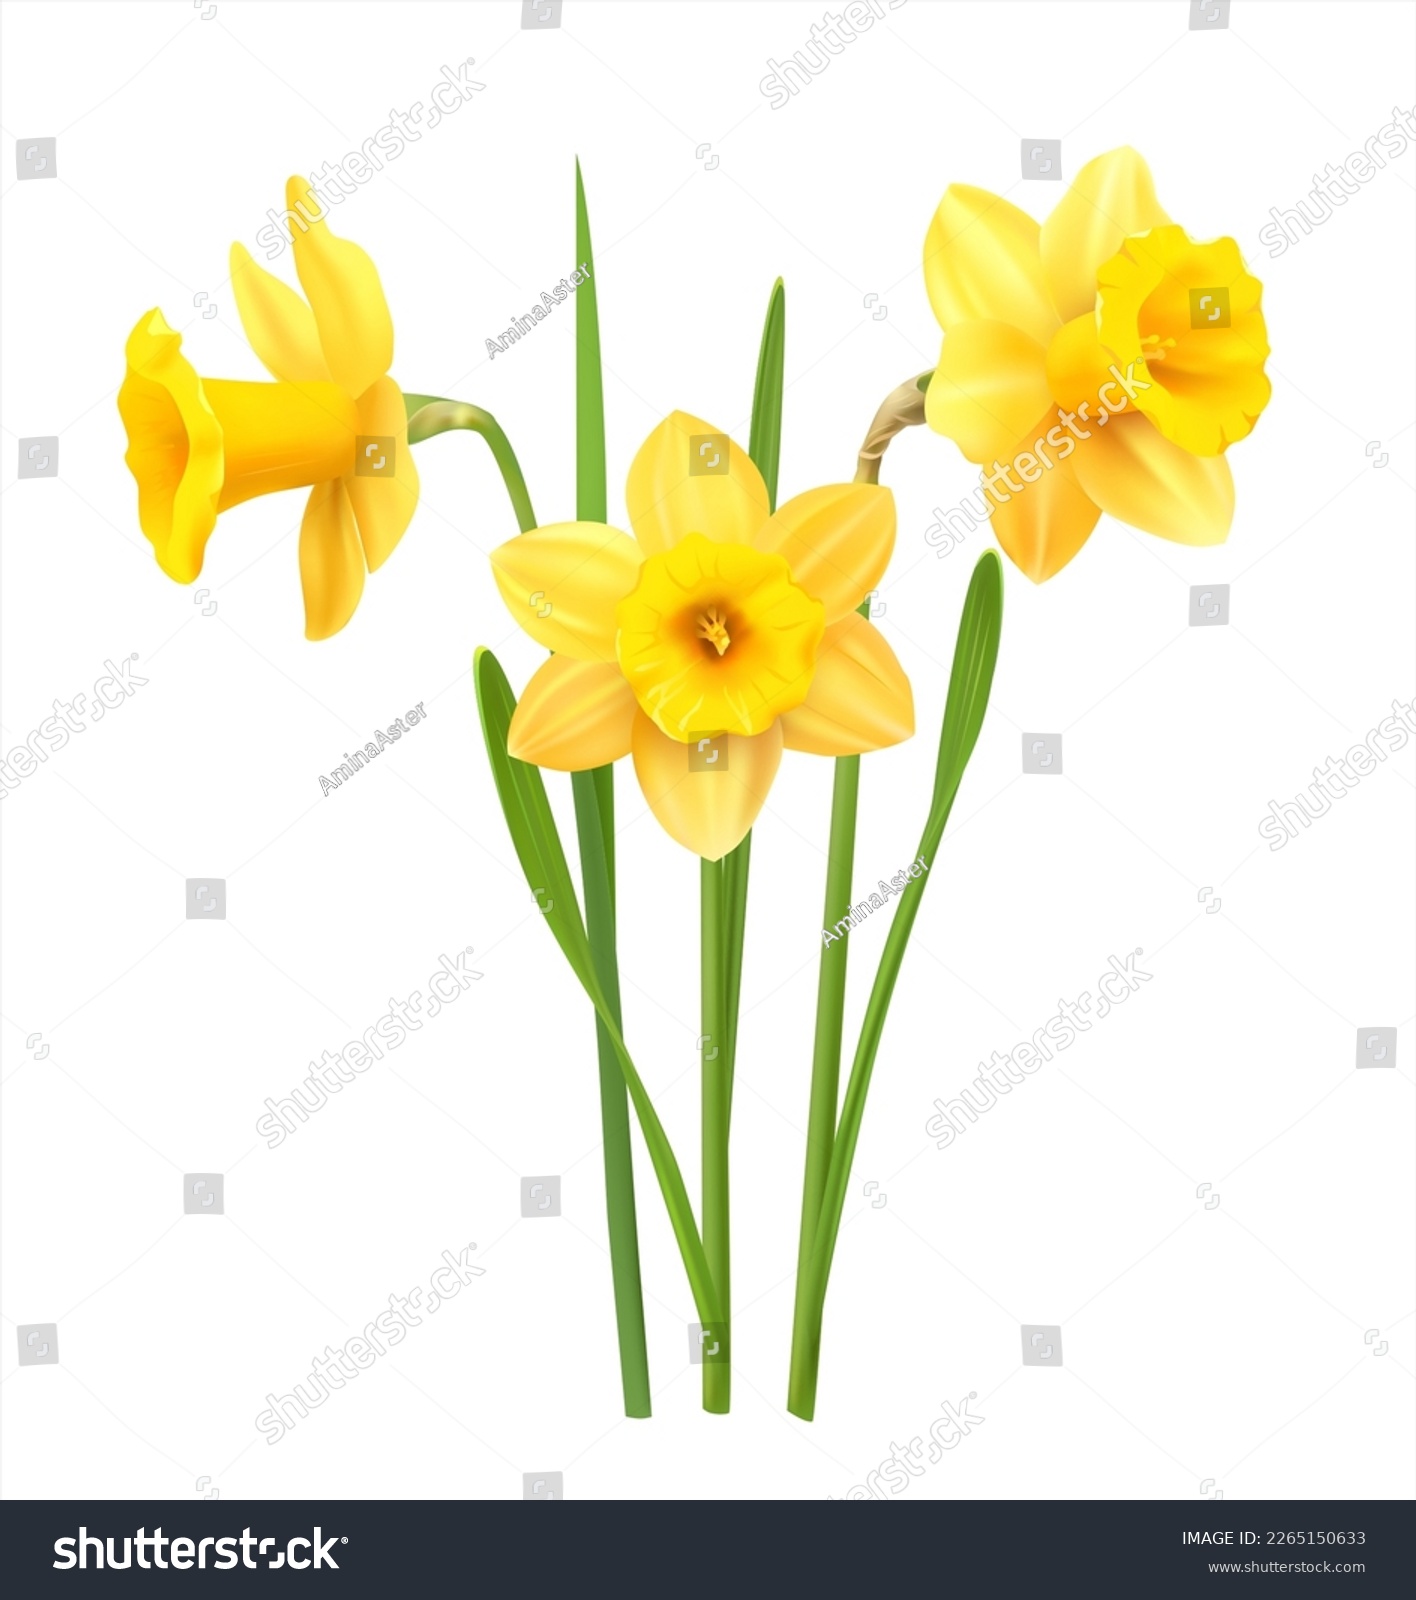 SVG of Yellow daffodils isolated on white. Vector illustration. svg